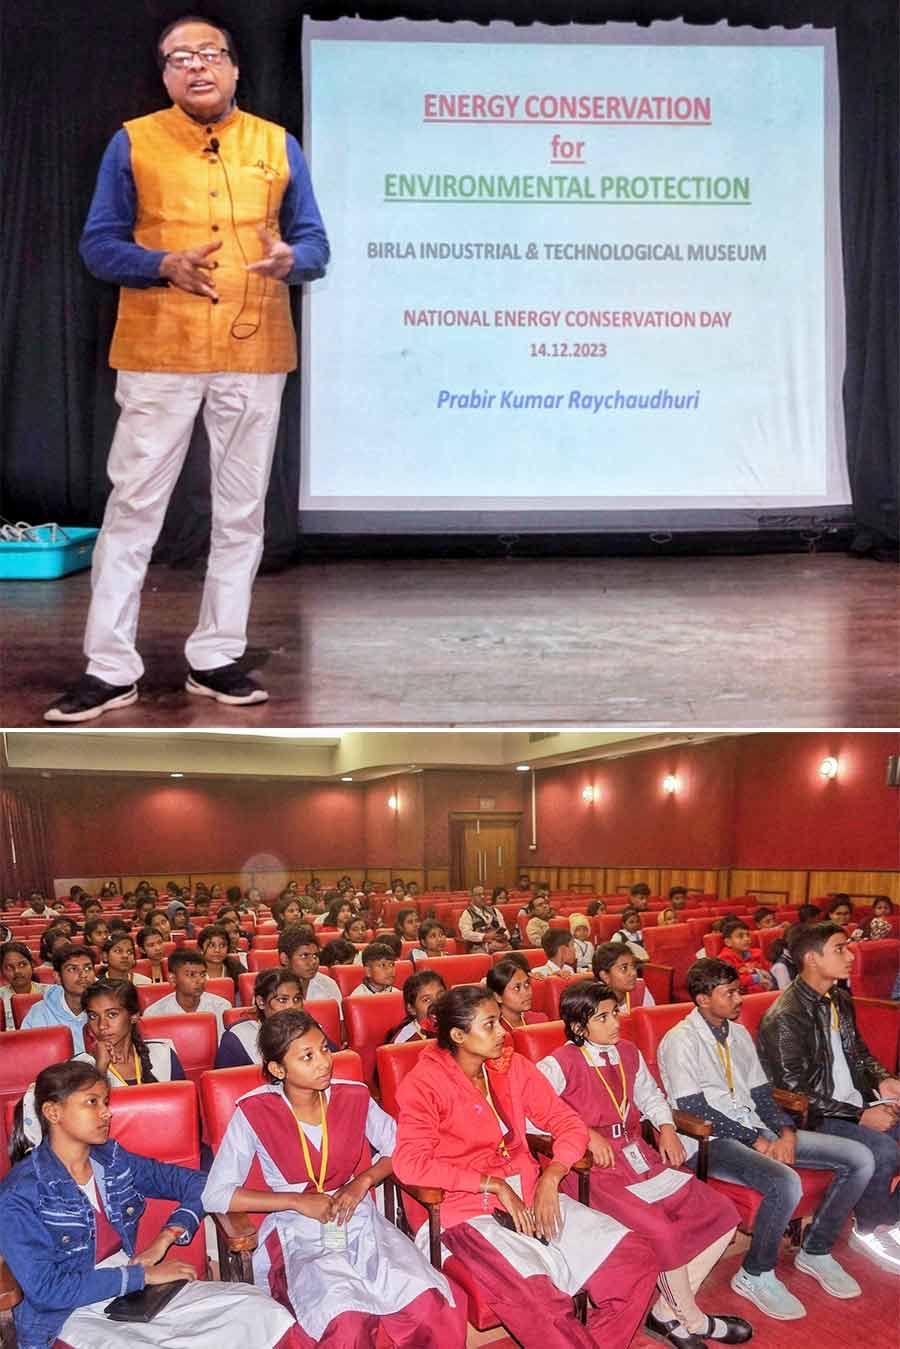 Birla Industrial and Technology Museum celebrated National Energy Conservation Day on Thursday. Prabir Kumar Raychaudhuri, former director of Petroleum Conservation Research Association delivered a lecture on energy conservation. Many school students were present at the programme 